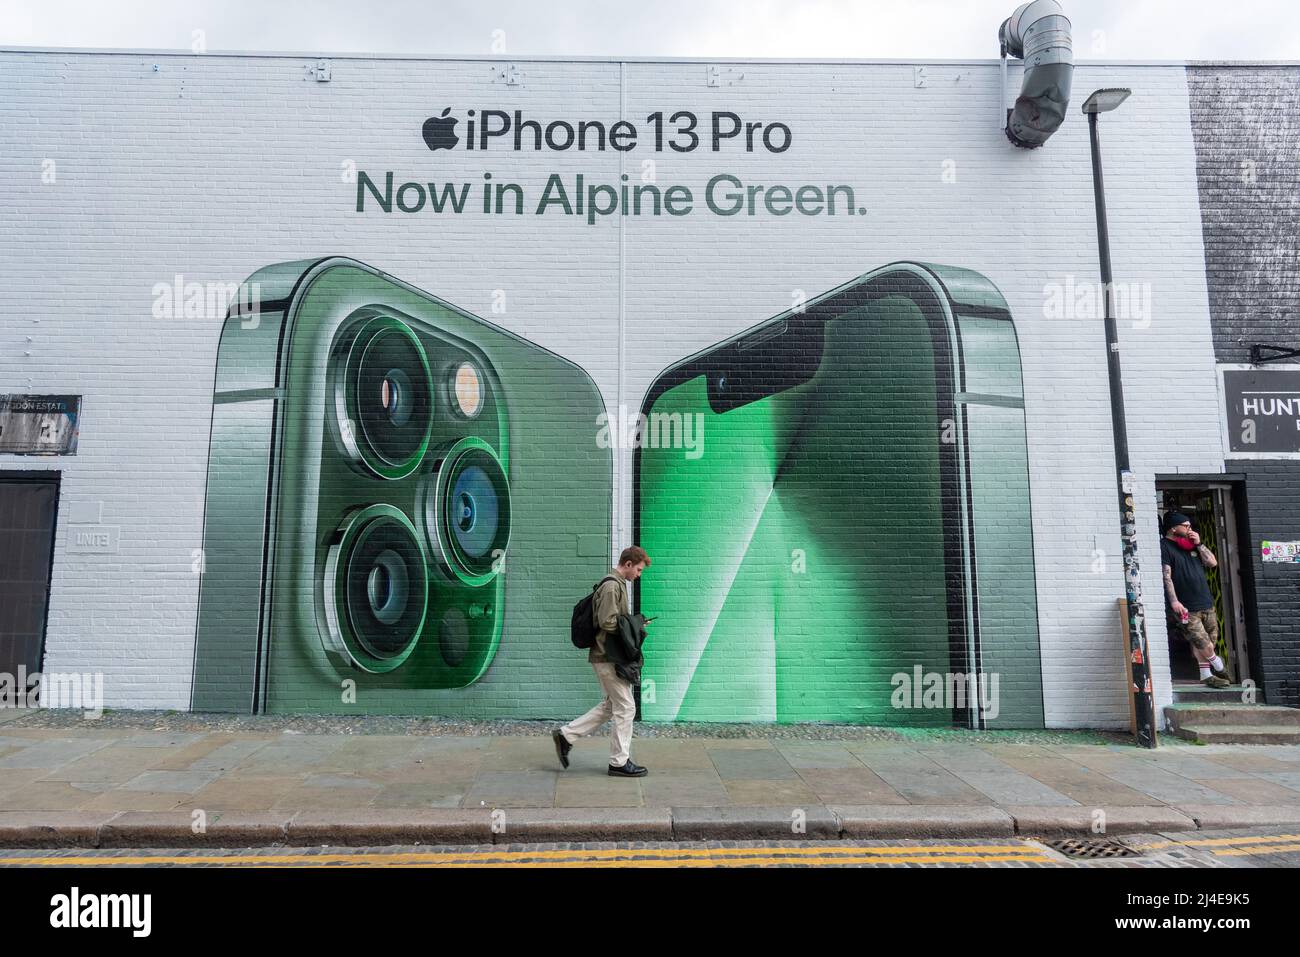 14/04/2022. London, UK. Photo by Ray Tang. A new Apple Pro 13 mural has been painted and unveiled in Shoreditch, East London today. The mural by EE mobile phone network features the new Alpine Green colour phone variant. Stock Photo